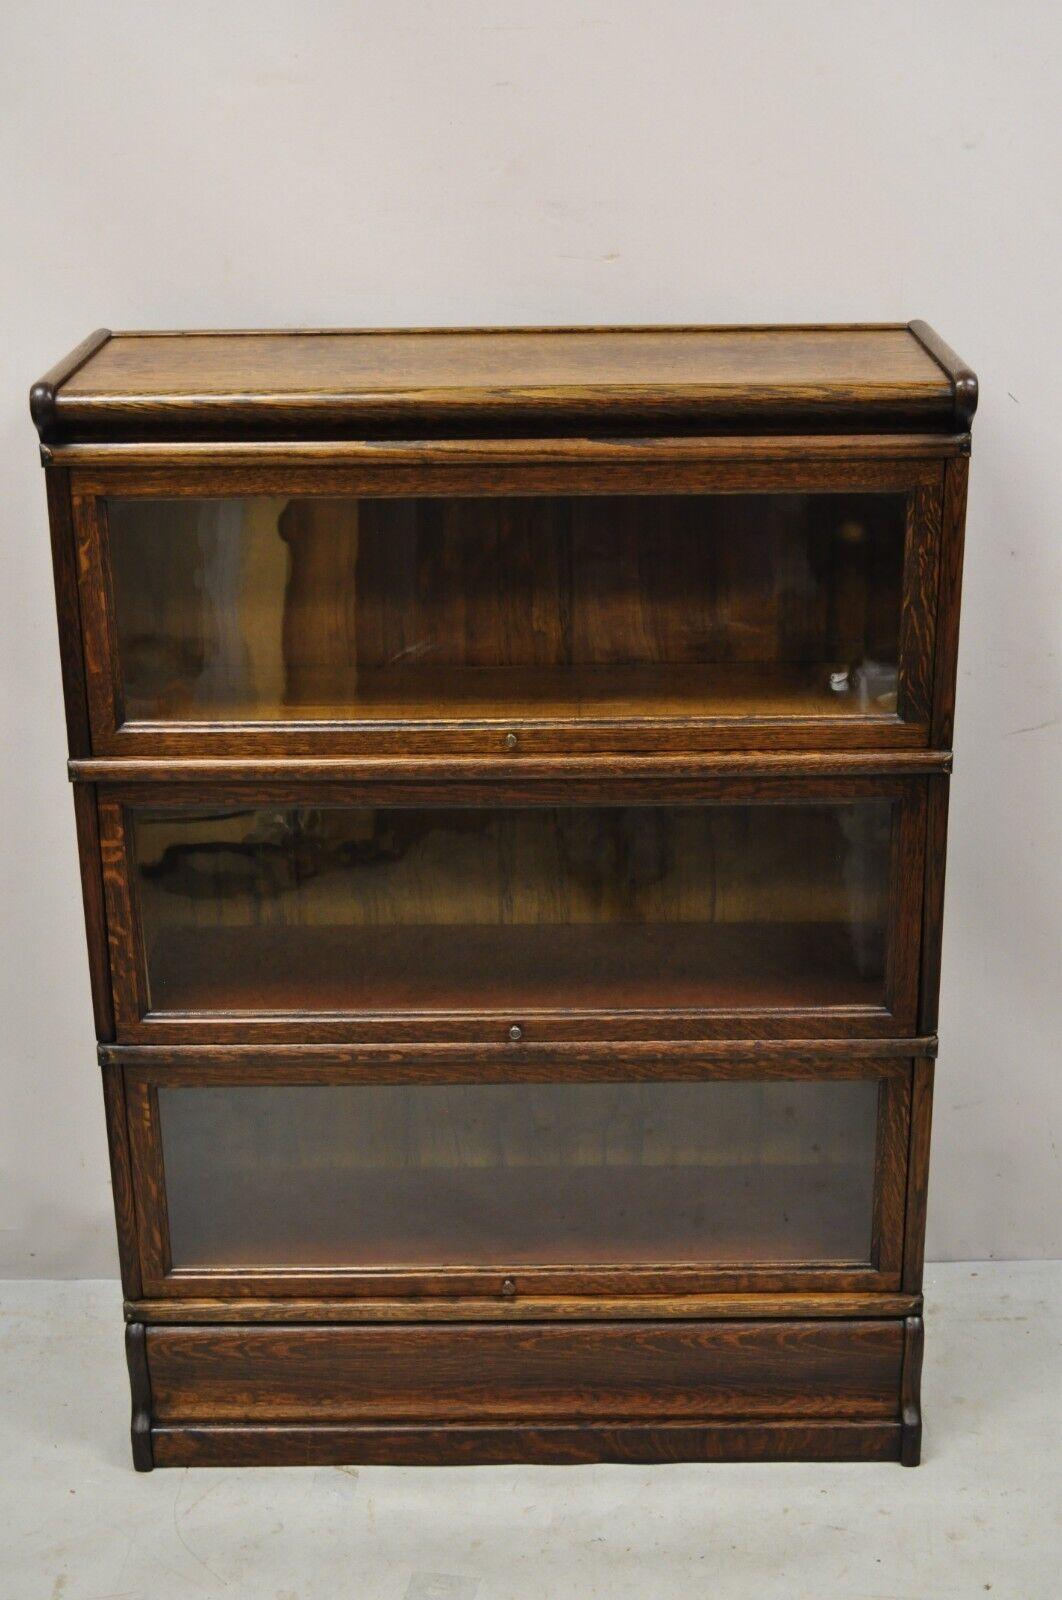 Antique macey 3 section mission oak stacking barrister lawyers bookcase. Item features (1) Top, (3) stacking bookcase sections, (1) base, beautiful wood grain, 5 part construction, original stamps, very nice antique item, great style and form. circa